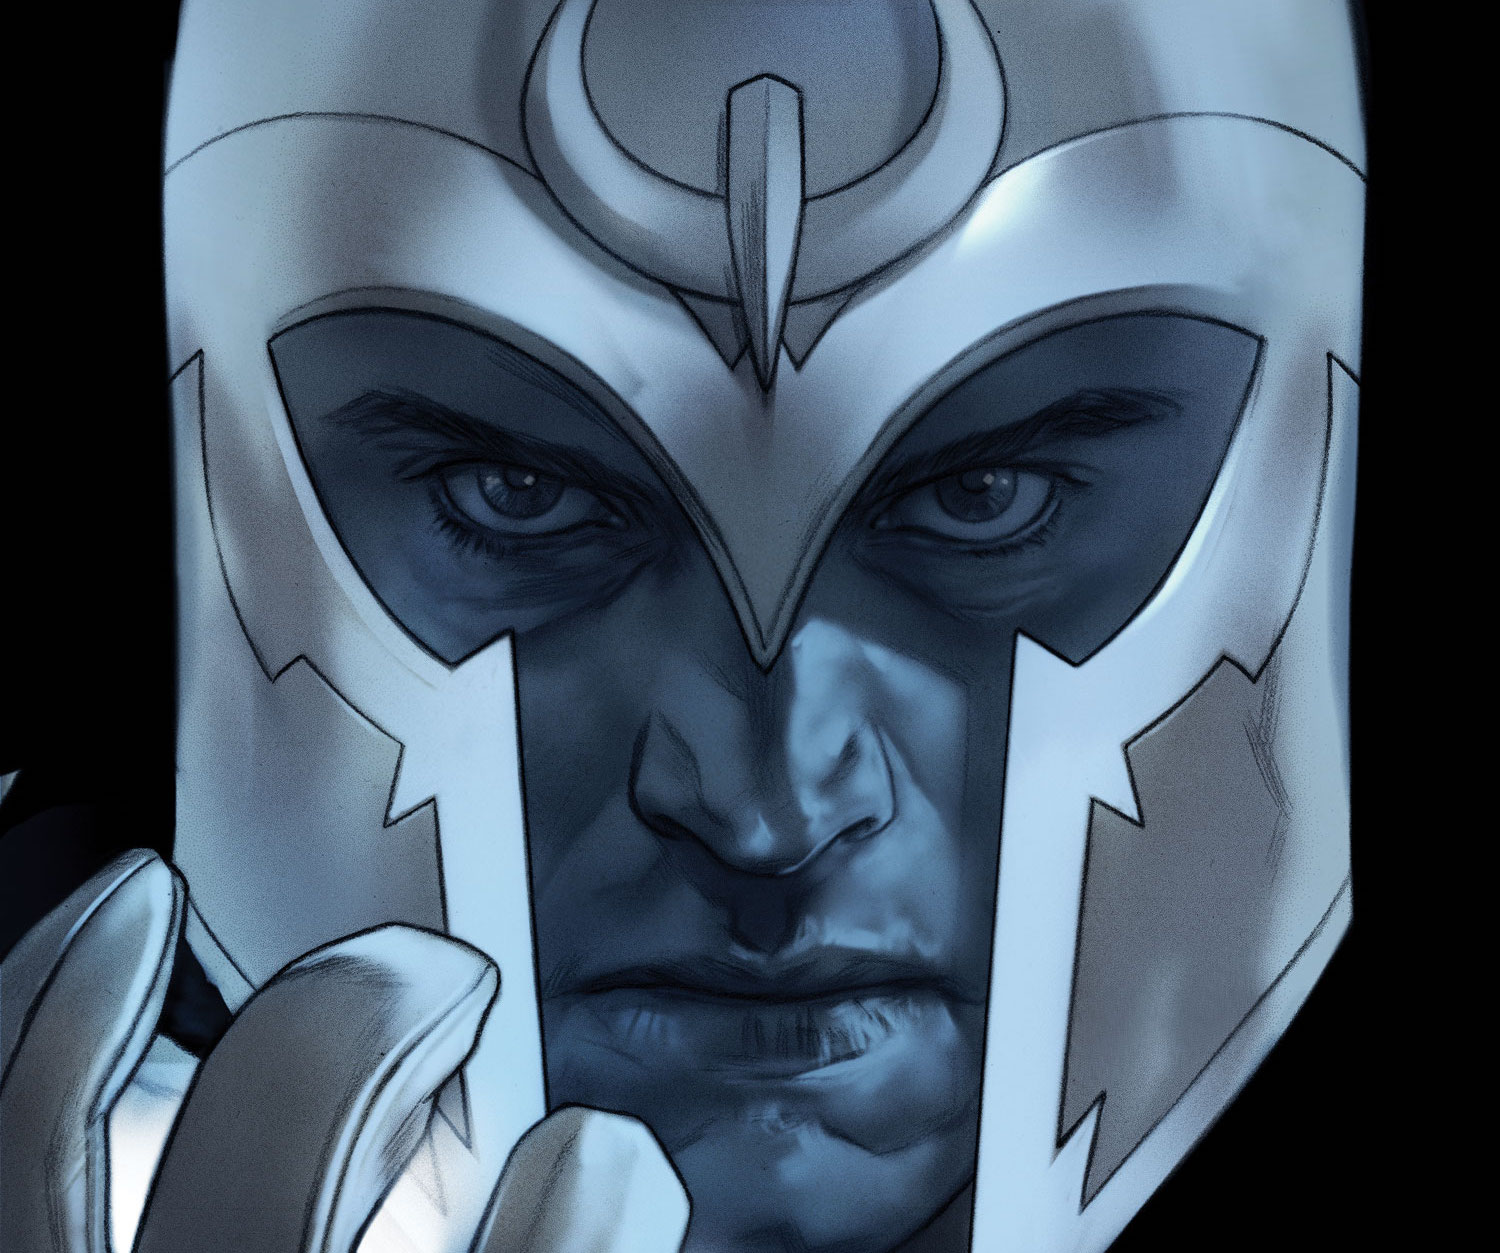 Jonathan Hickman's Giant-Size X-Men to feature Magneto in March with Ben Oliver on art